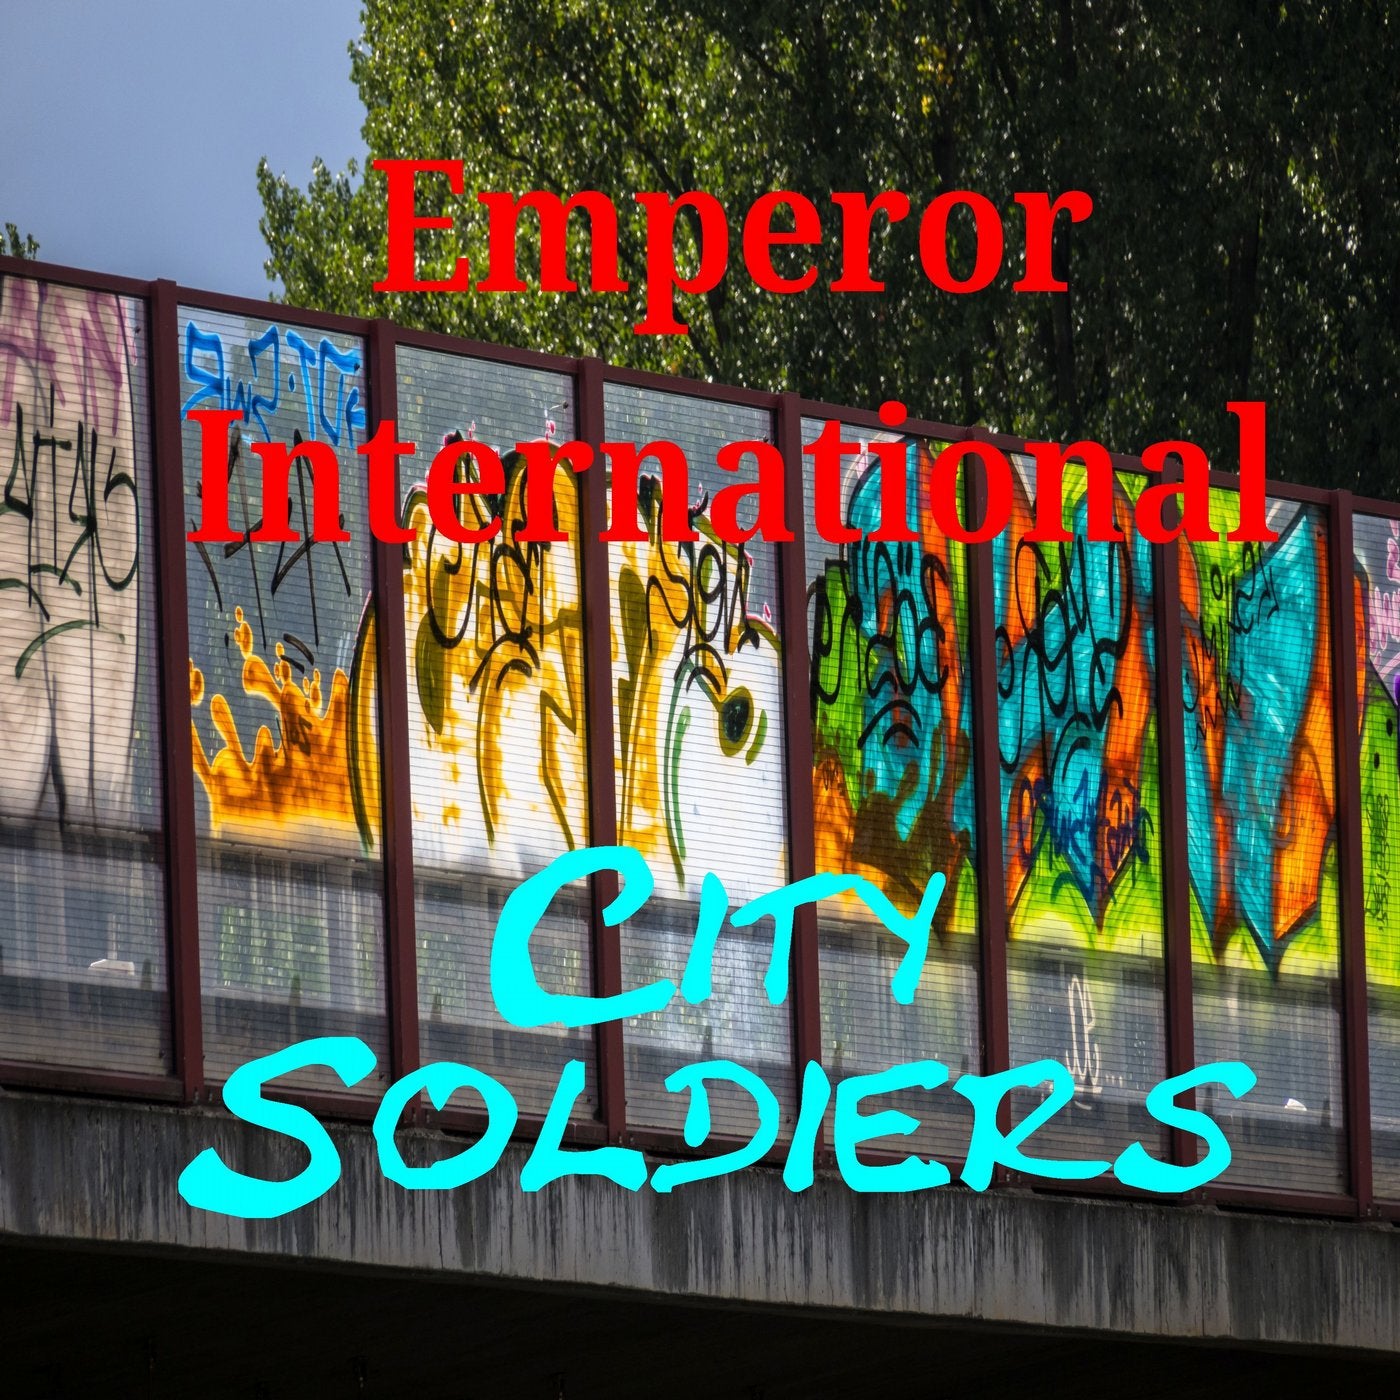 City Soldiers